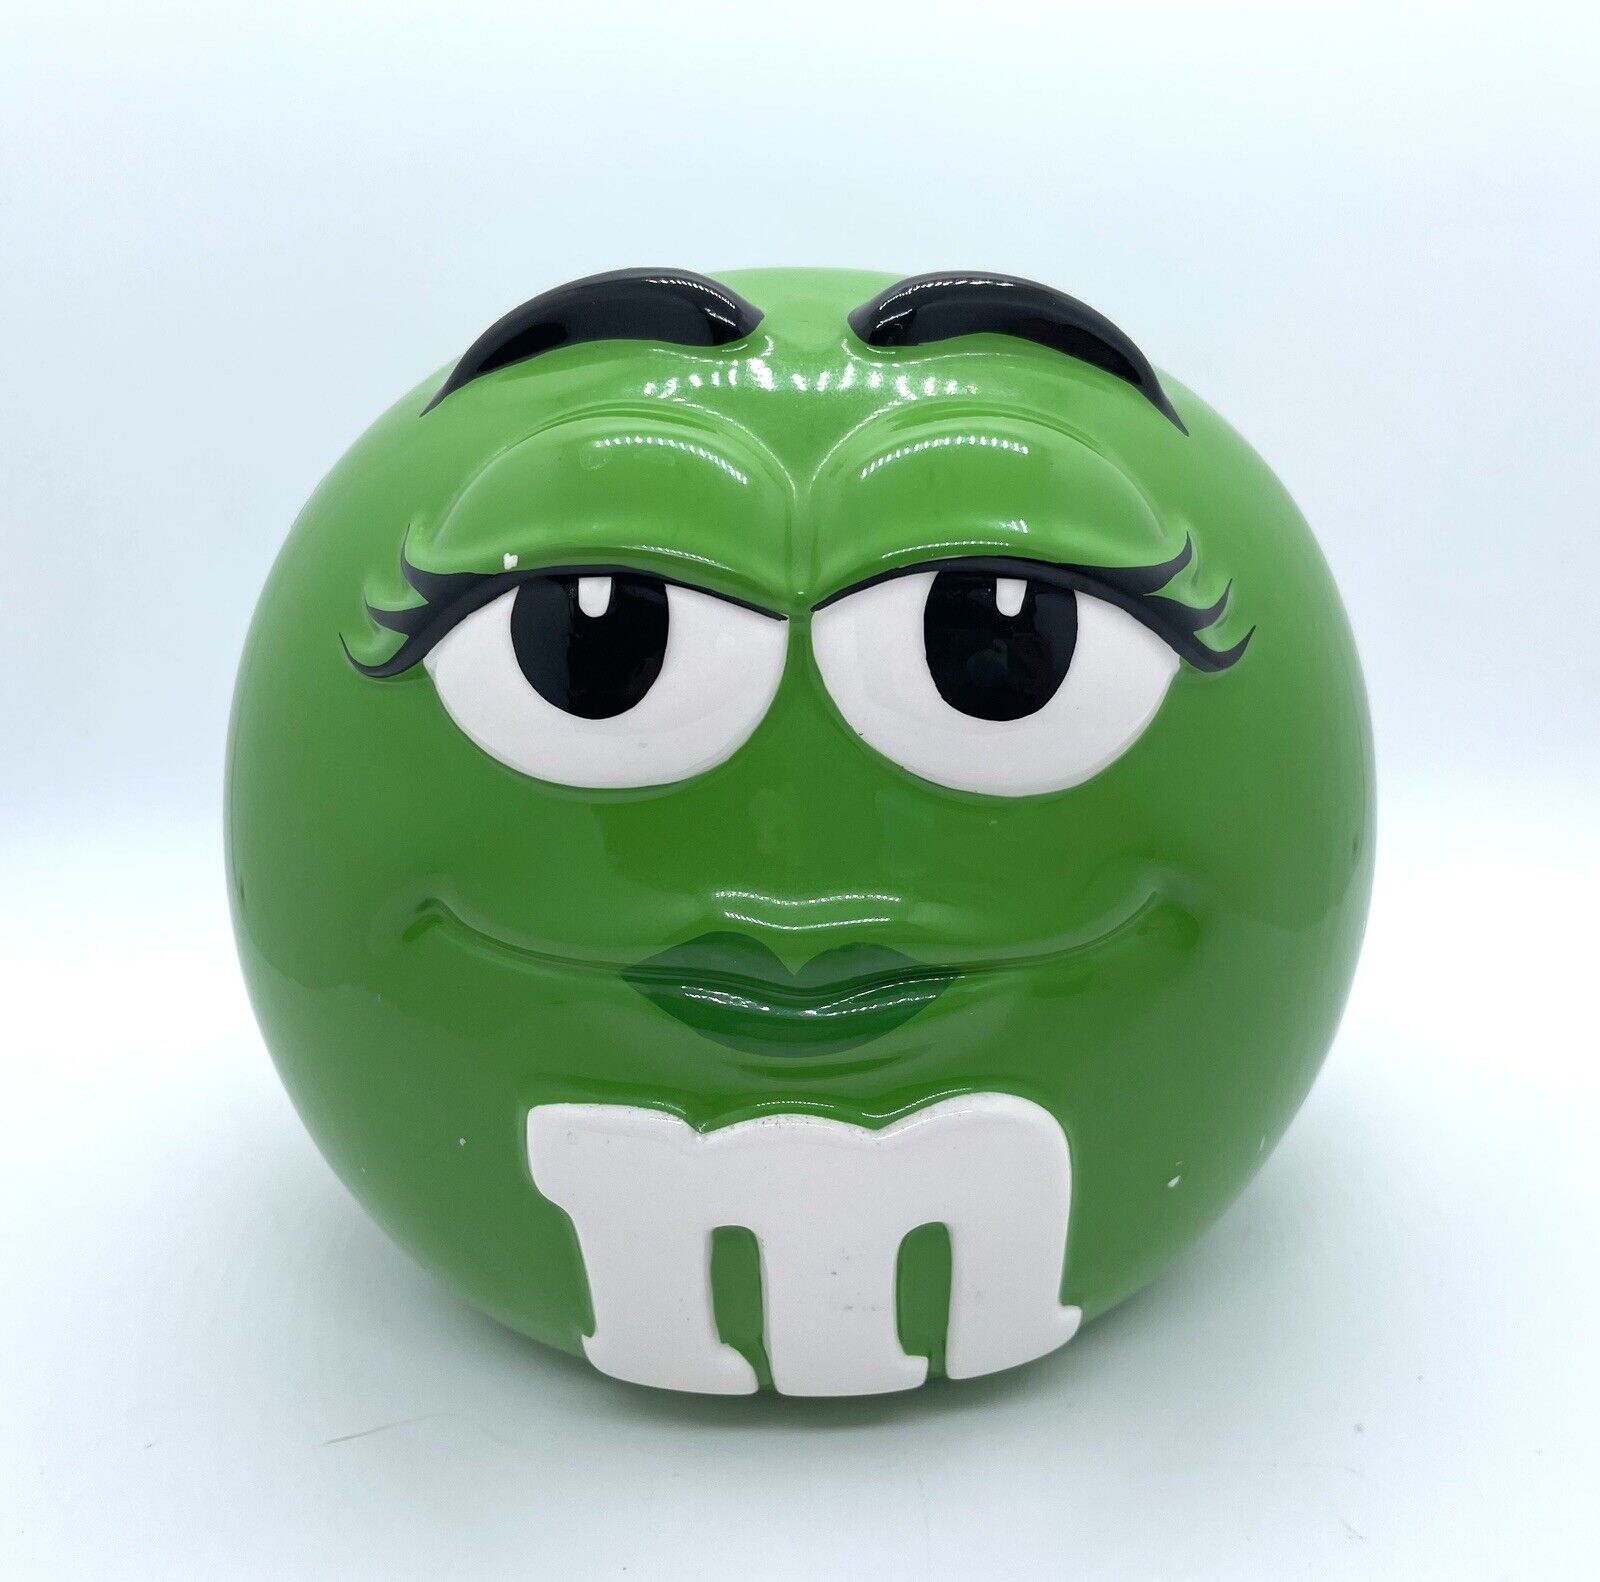 Vtg Ms. GALERIE Green M&M Ceramic Candy Dispenser Cookie Jar Small 5.5” SEE PICS